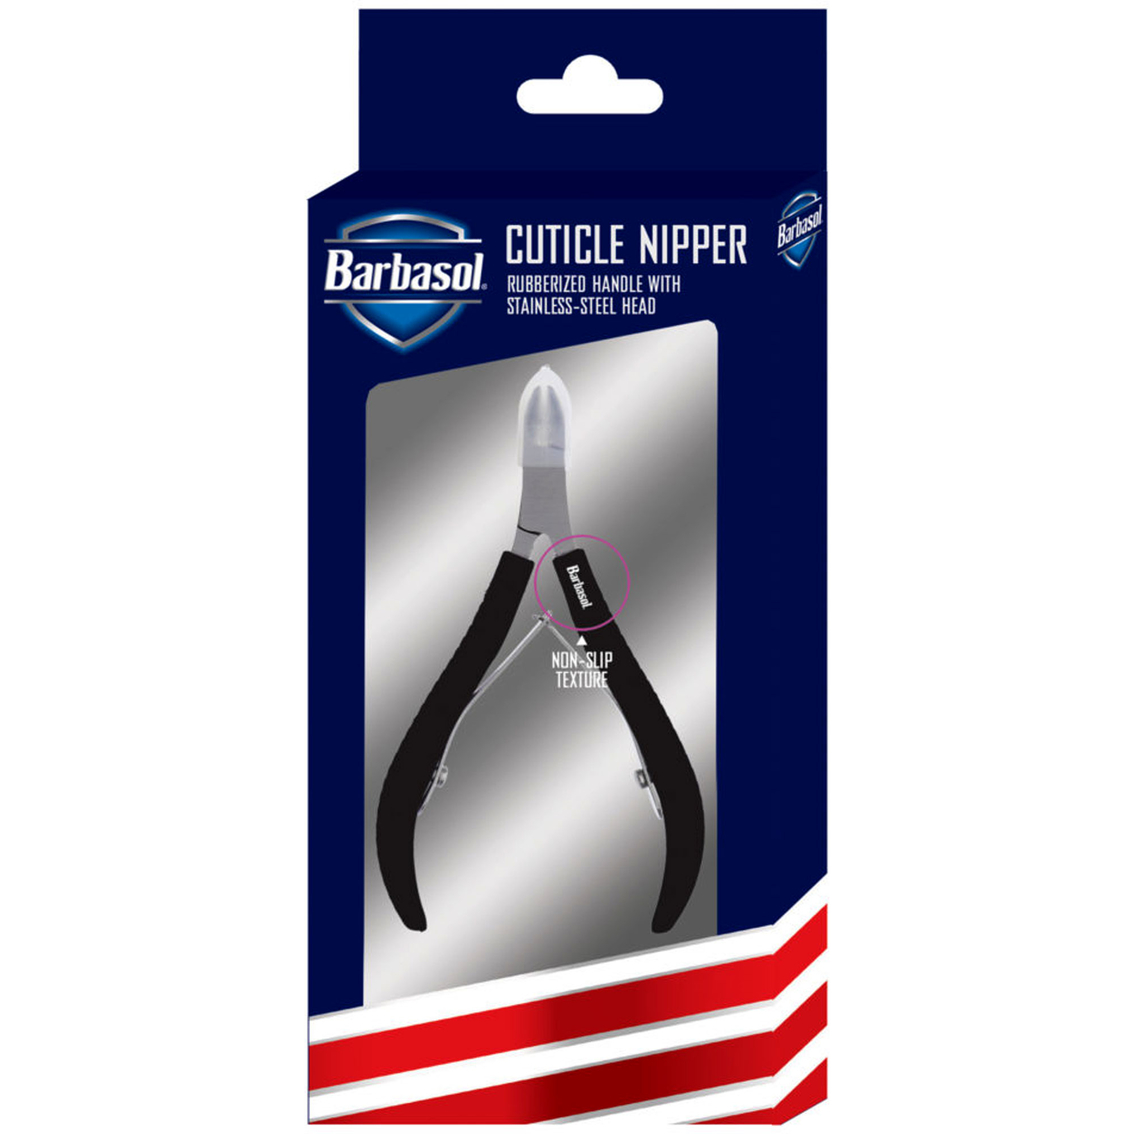 Barbasol Cutical Nipper with Rubberized Handles - Image 5 of 5